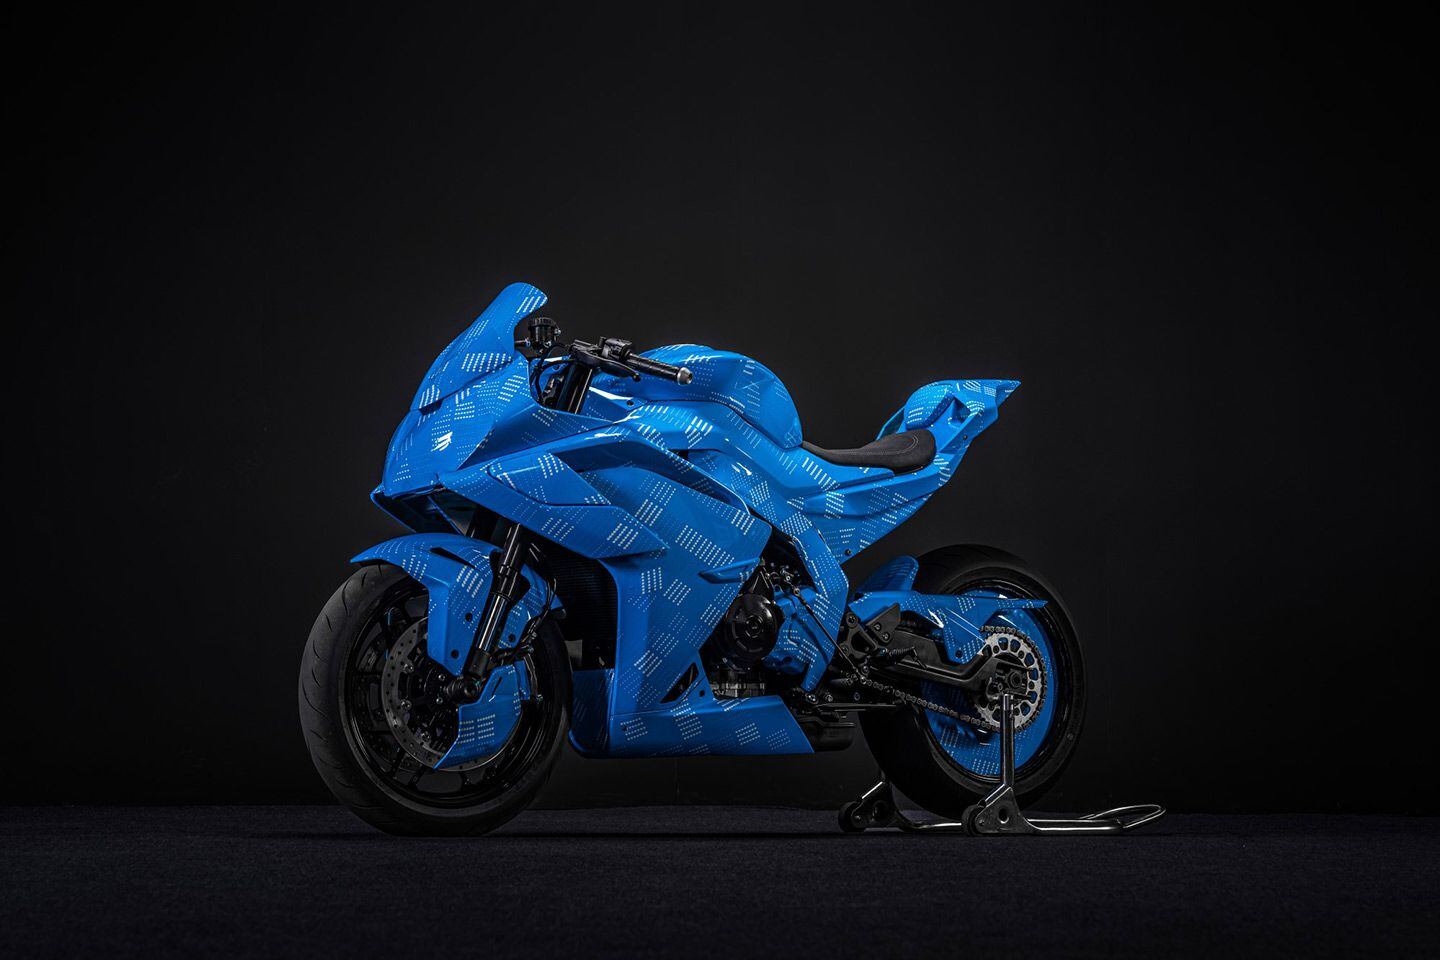 The cloaked 500SR has very modern aerodynamic elements on the side panels and brake discs.